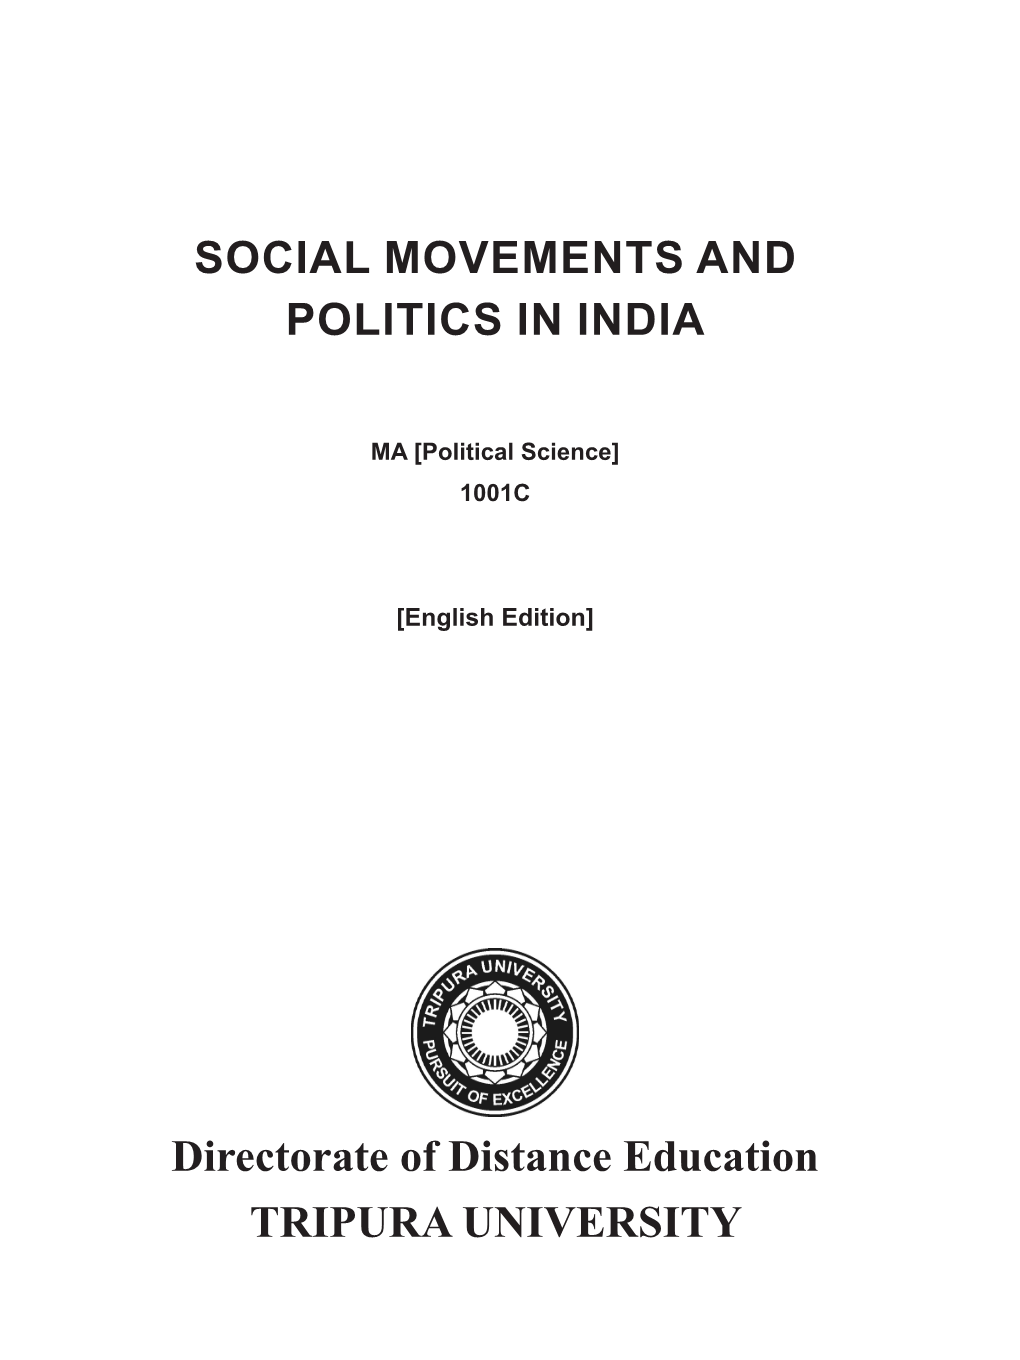 Social Movements and Politics in India